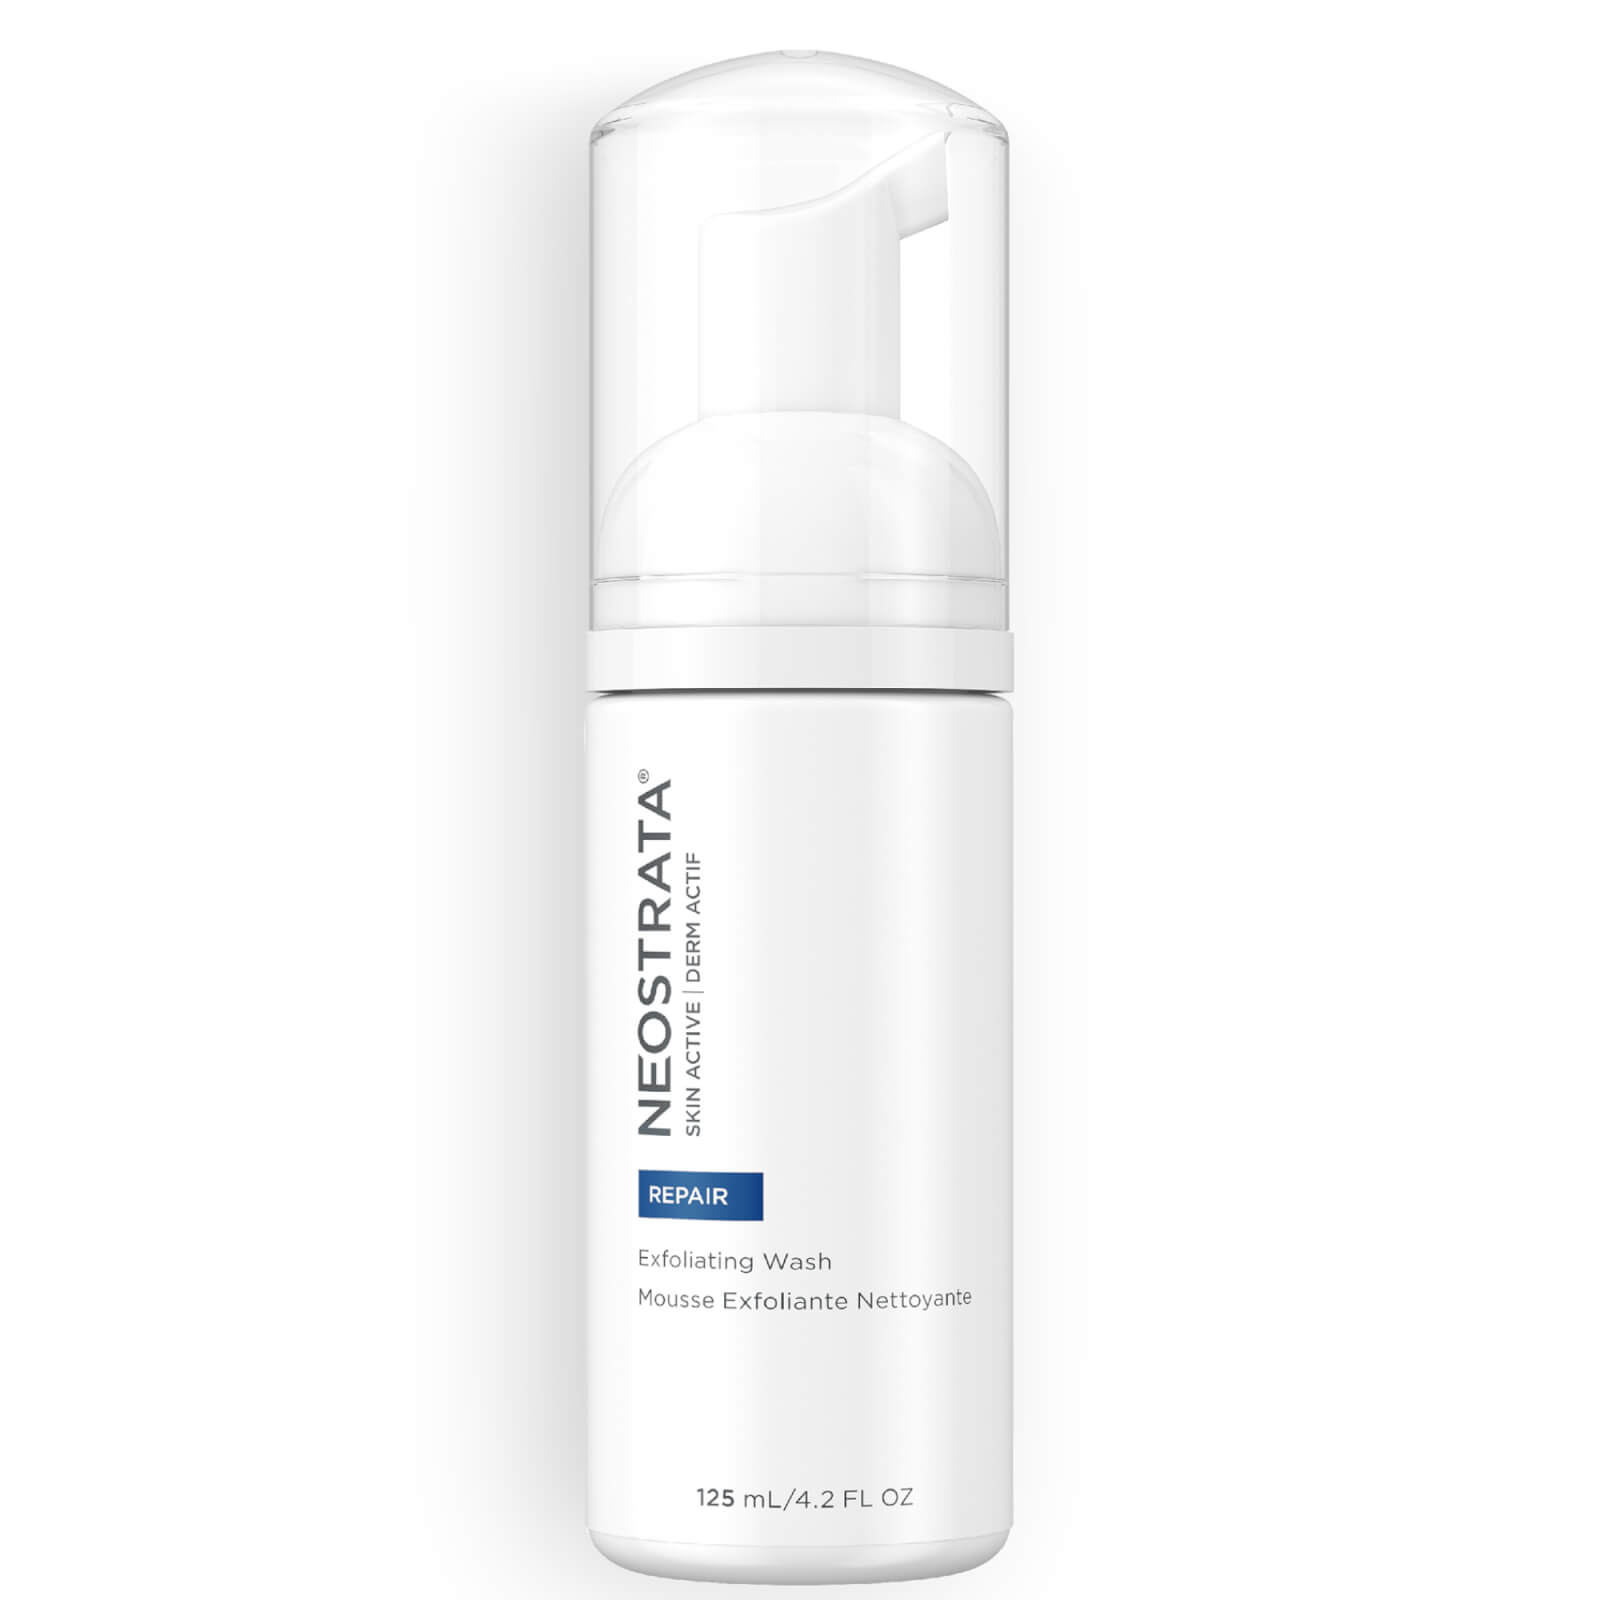 Photos - Facial / Body Cleansing Product Neostrata Skin Active Exfoliating Wash Facial Cleanser for Mature Skin 125